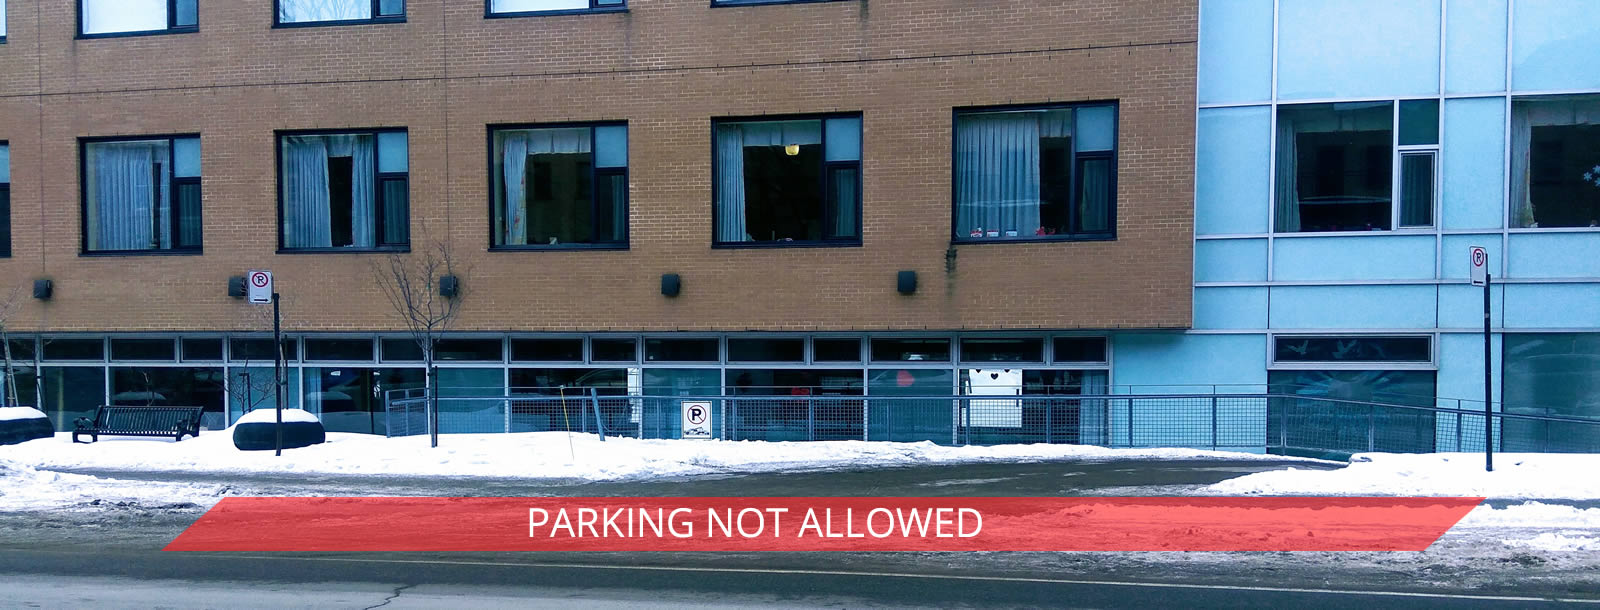 Montreal Street Parking: Signs 1